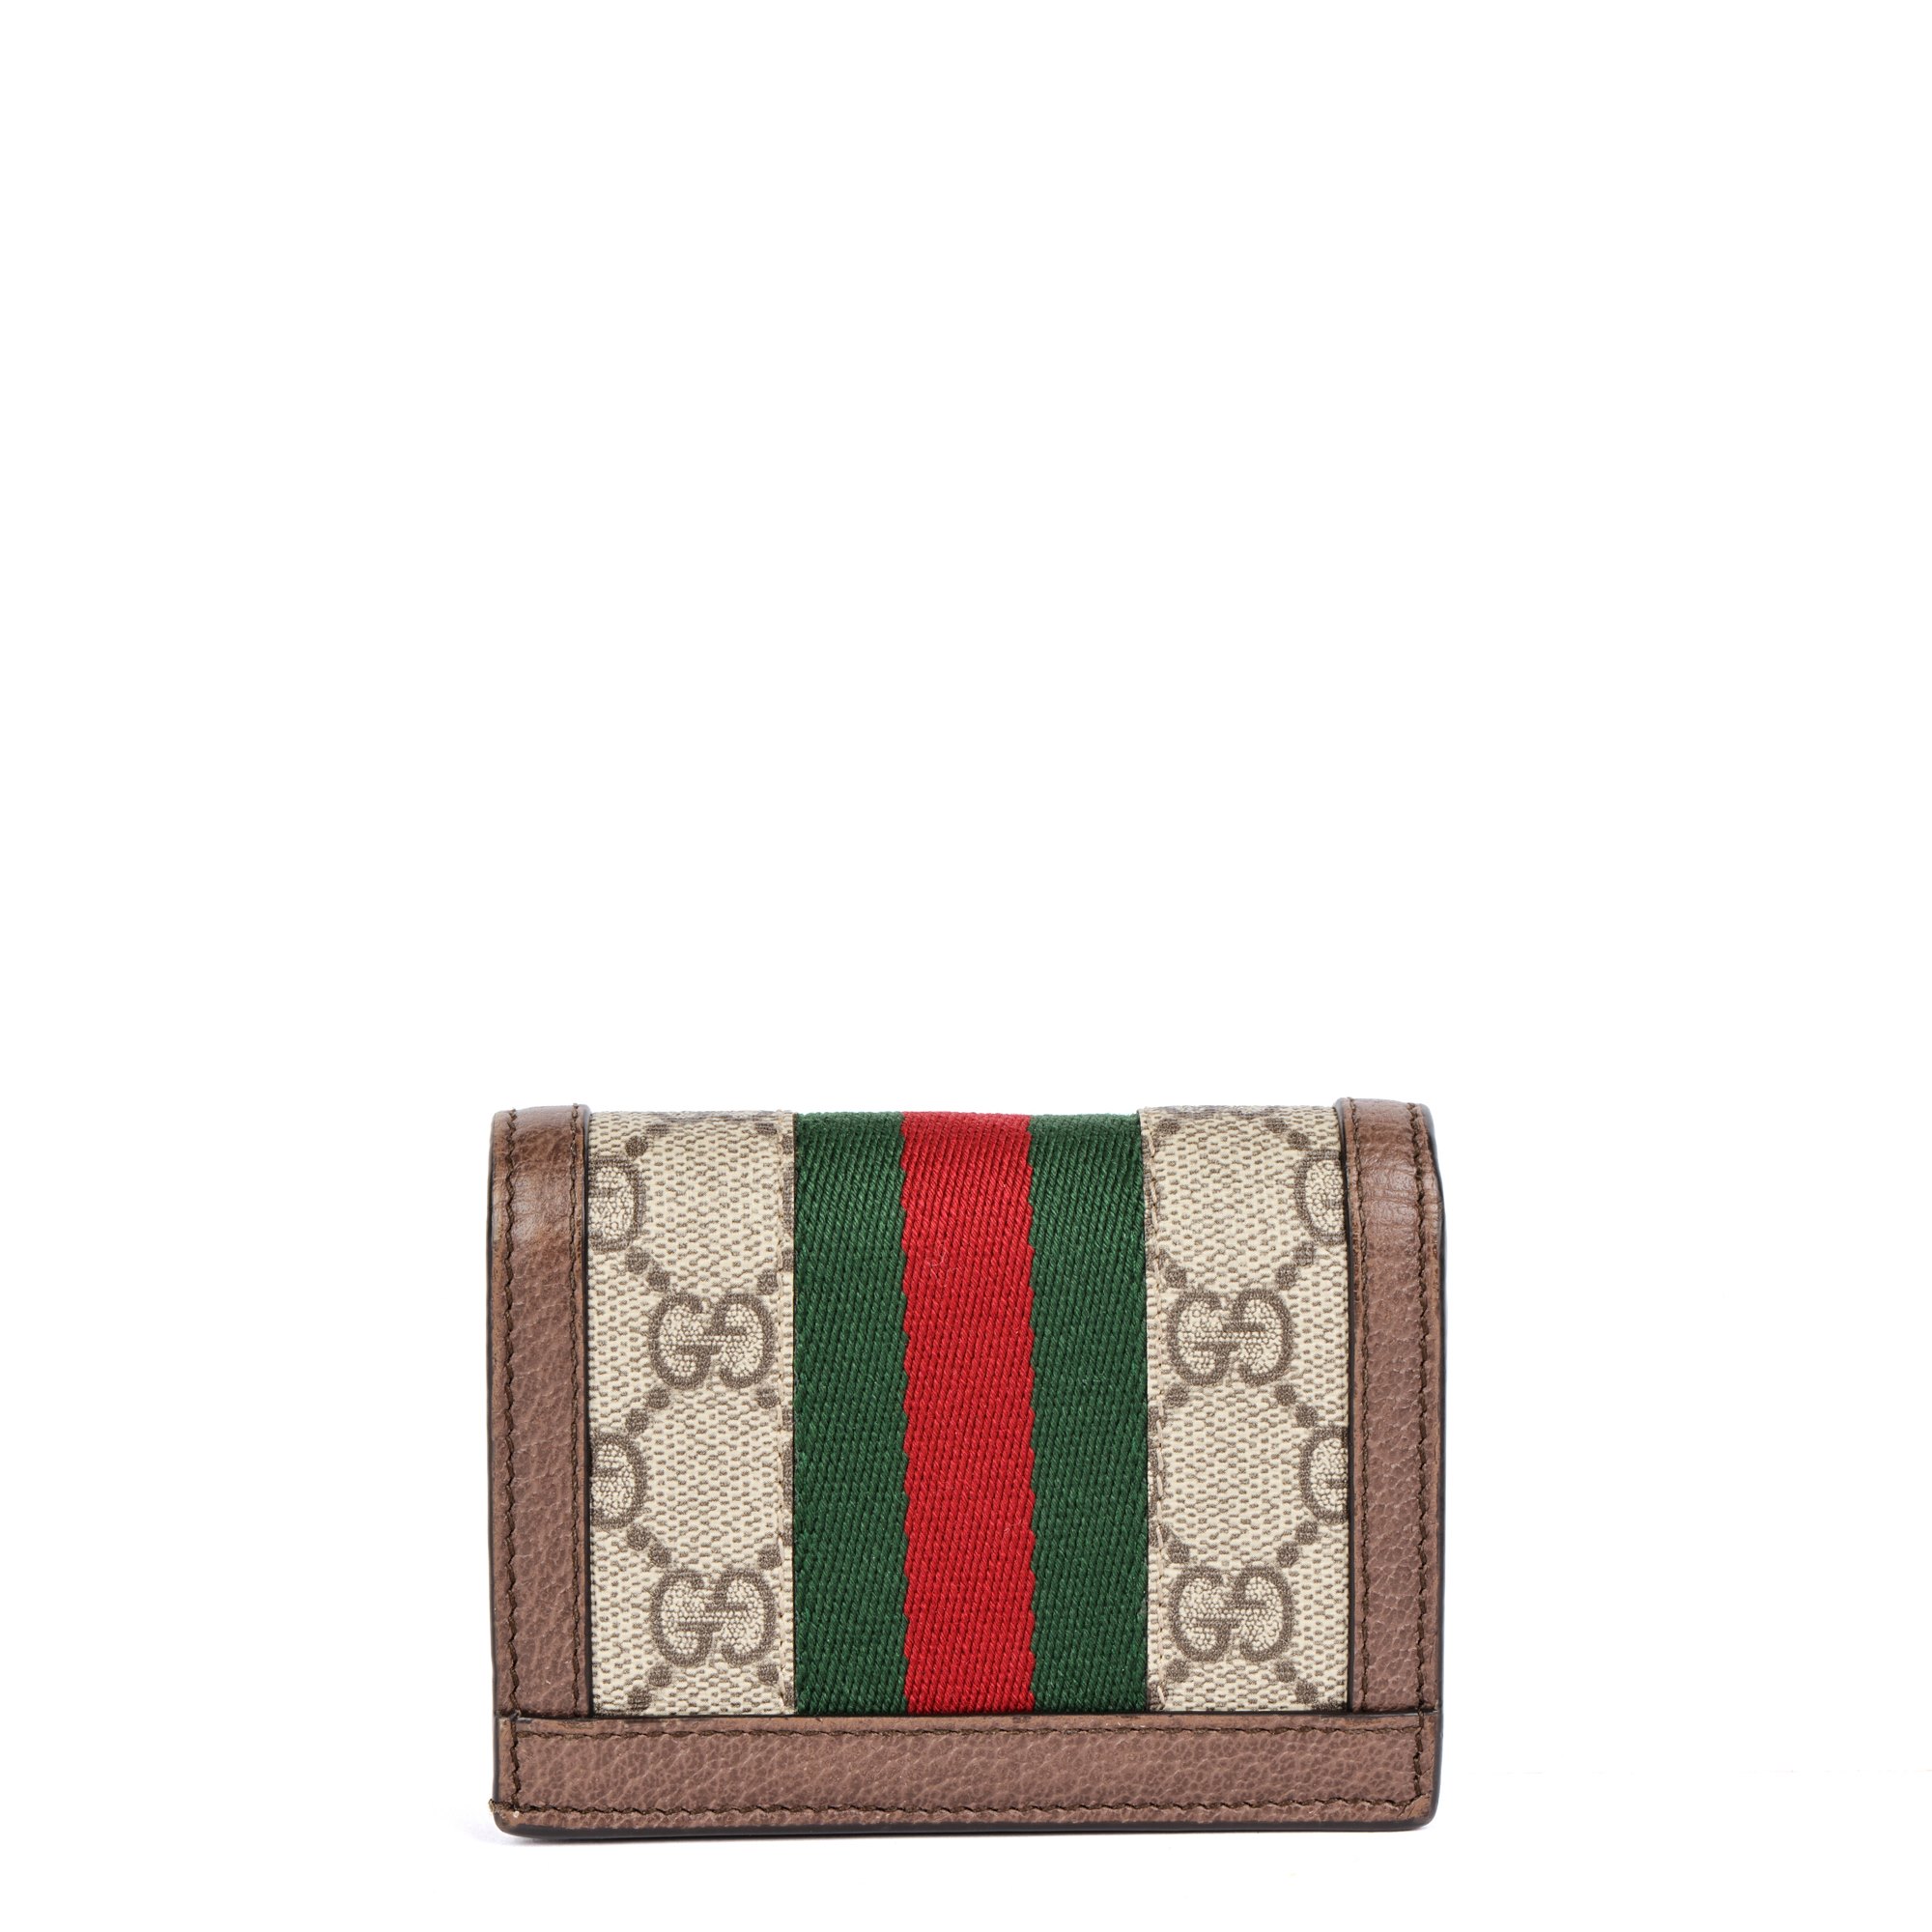 Gucci Beige, Ebony & Brown GG Supreme Canvas and Leather Ophidia GG Card Case Wallet